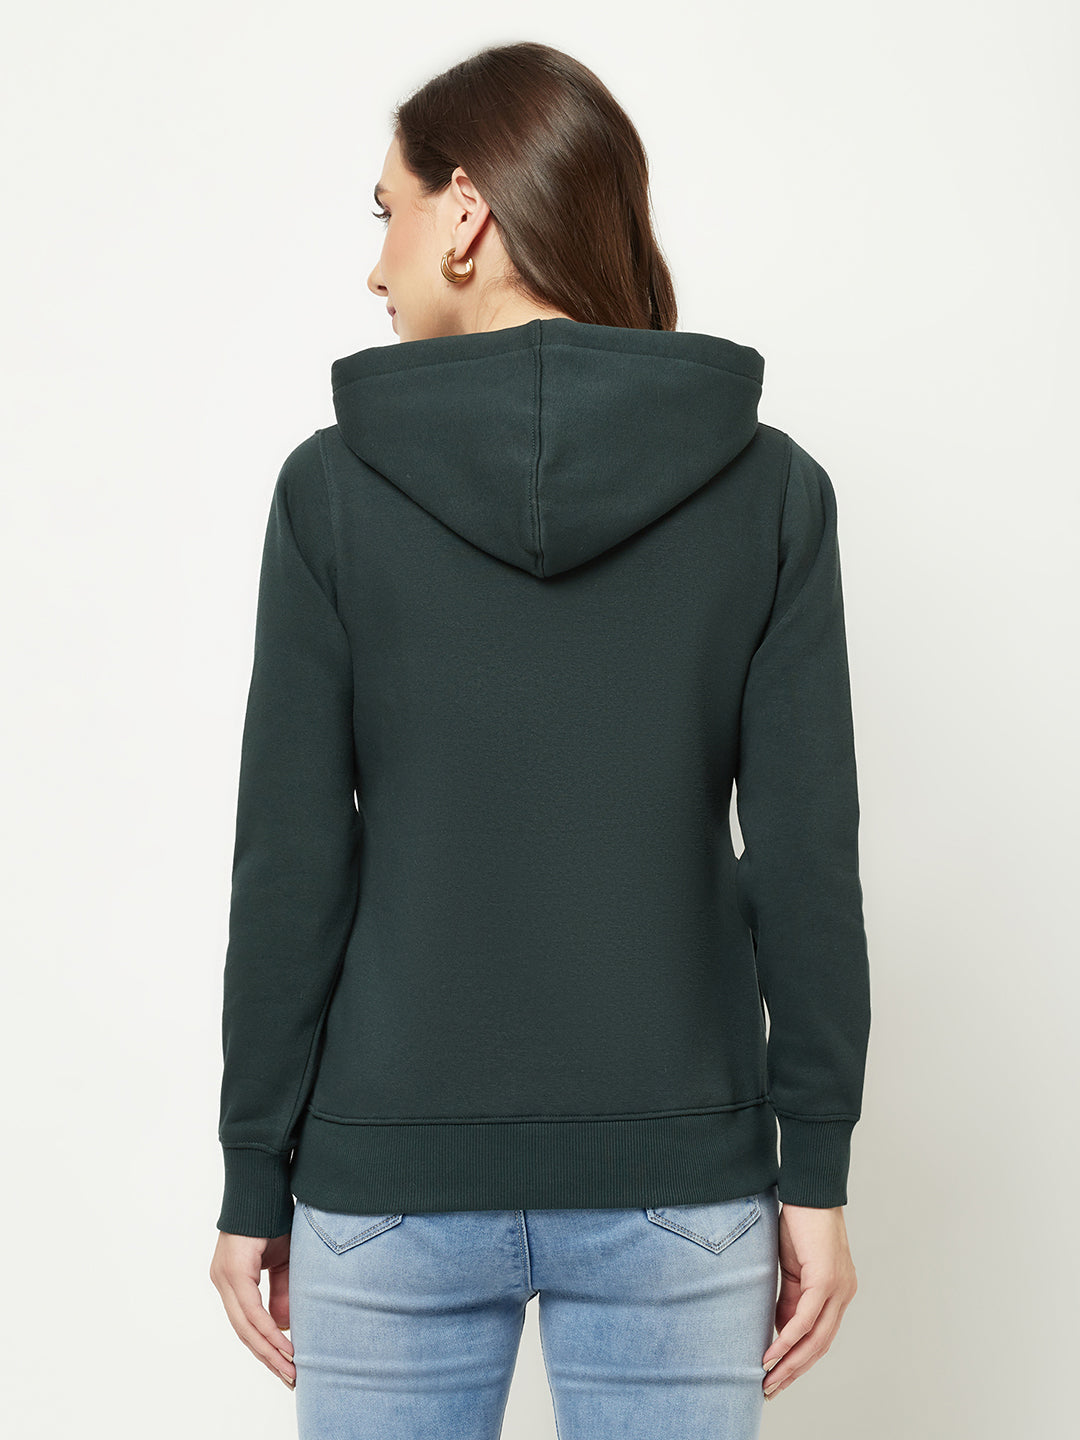  Green Graphic Hoodie